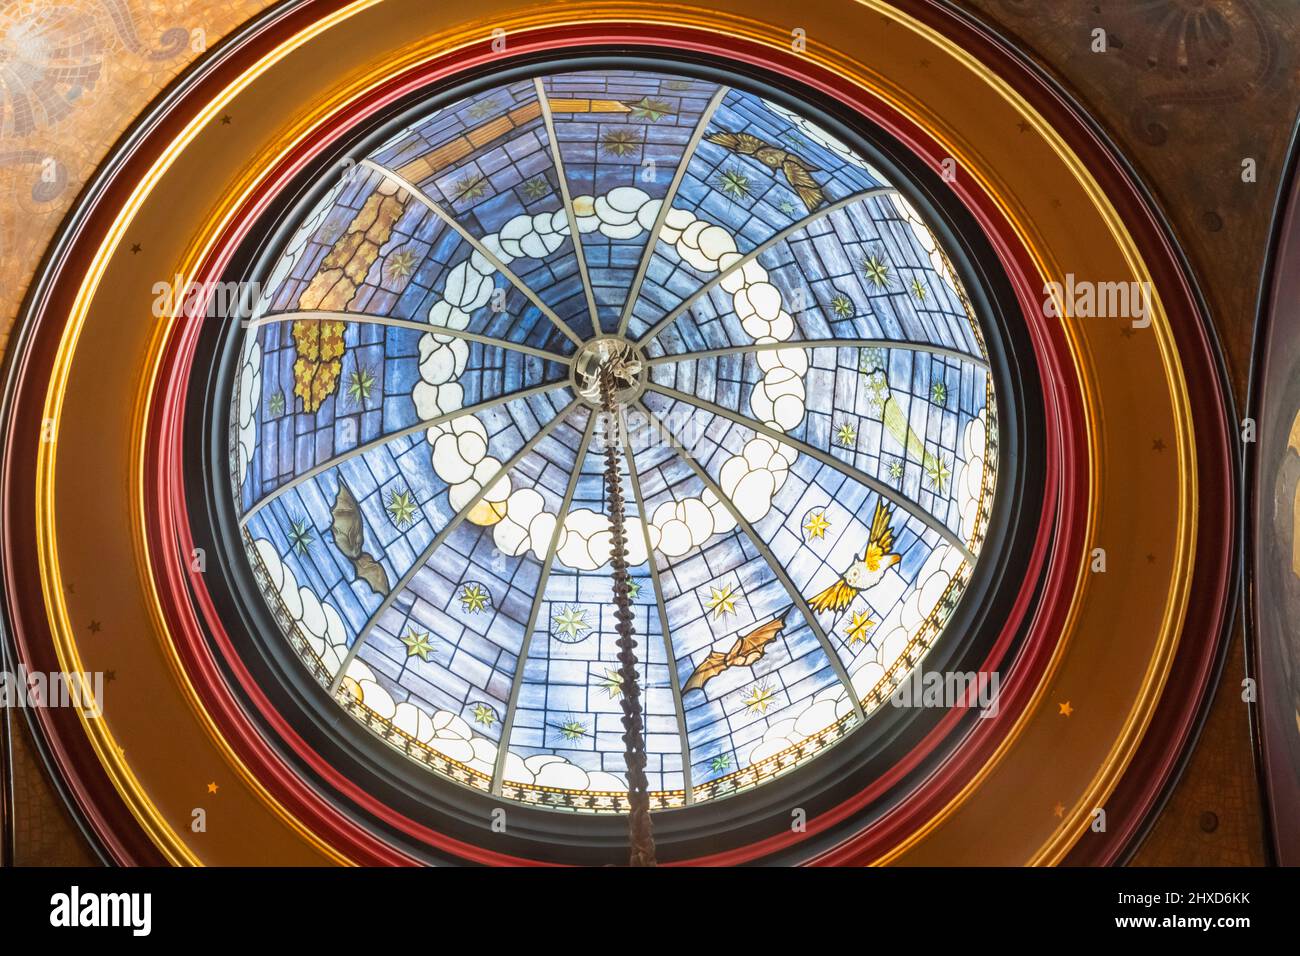 Angleterre, Dorset, Bournemouth, Musée Russell-cotes, Stairway Skylight avec vitraux Banque D'Images